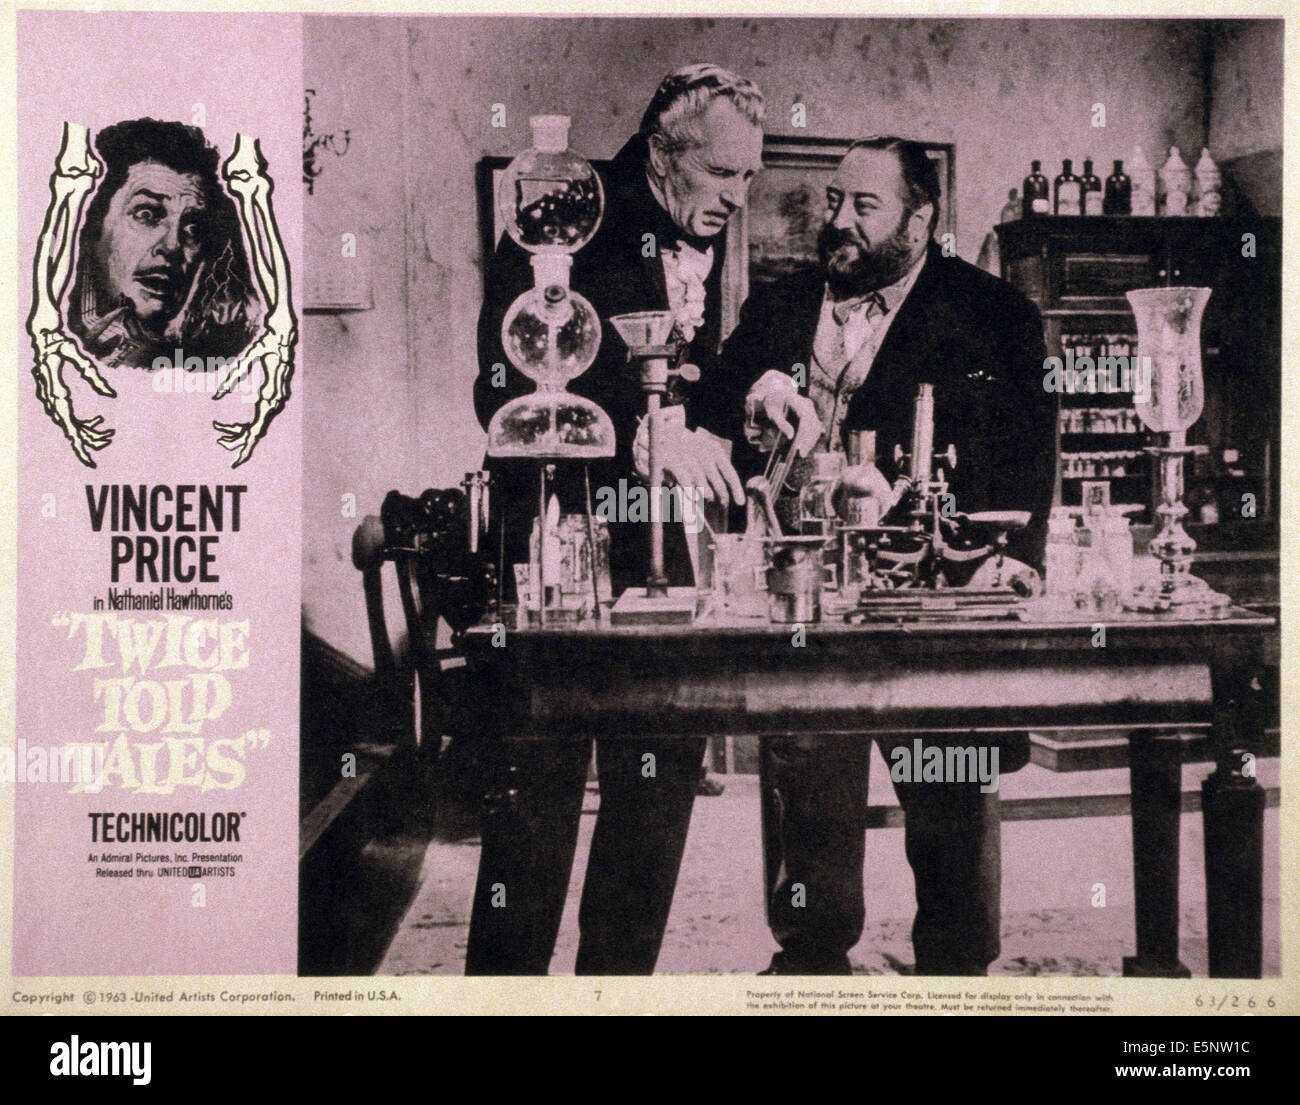 Due volte raccontano storie, (aka DUE VOLTE-RACCONTANO STORIE), US lobbycard, Vincent Price (sinistra), centro da sinistra: Vincent Price, Sebastian Cabot, Foto Stock